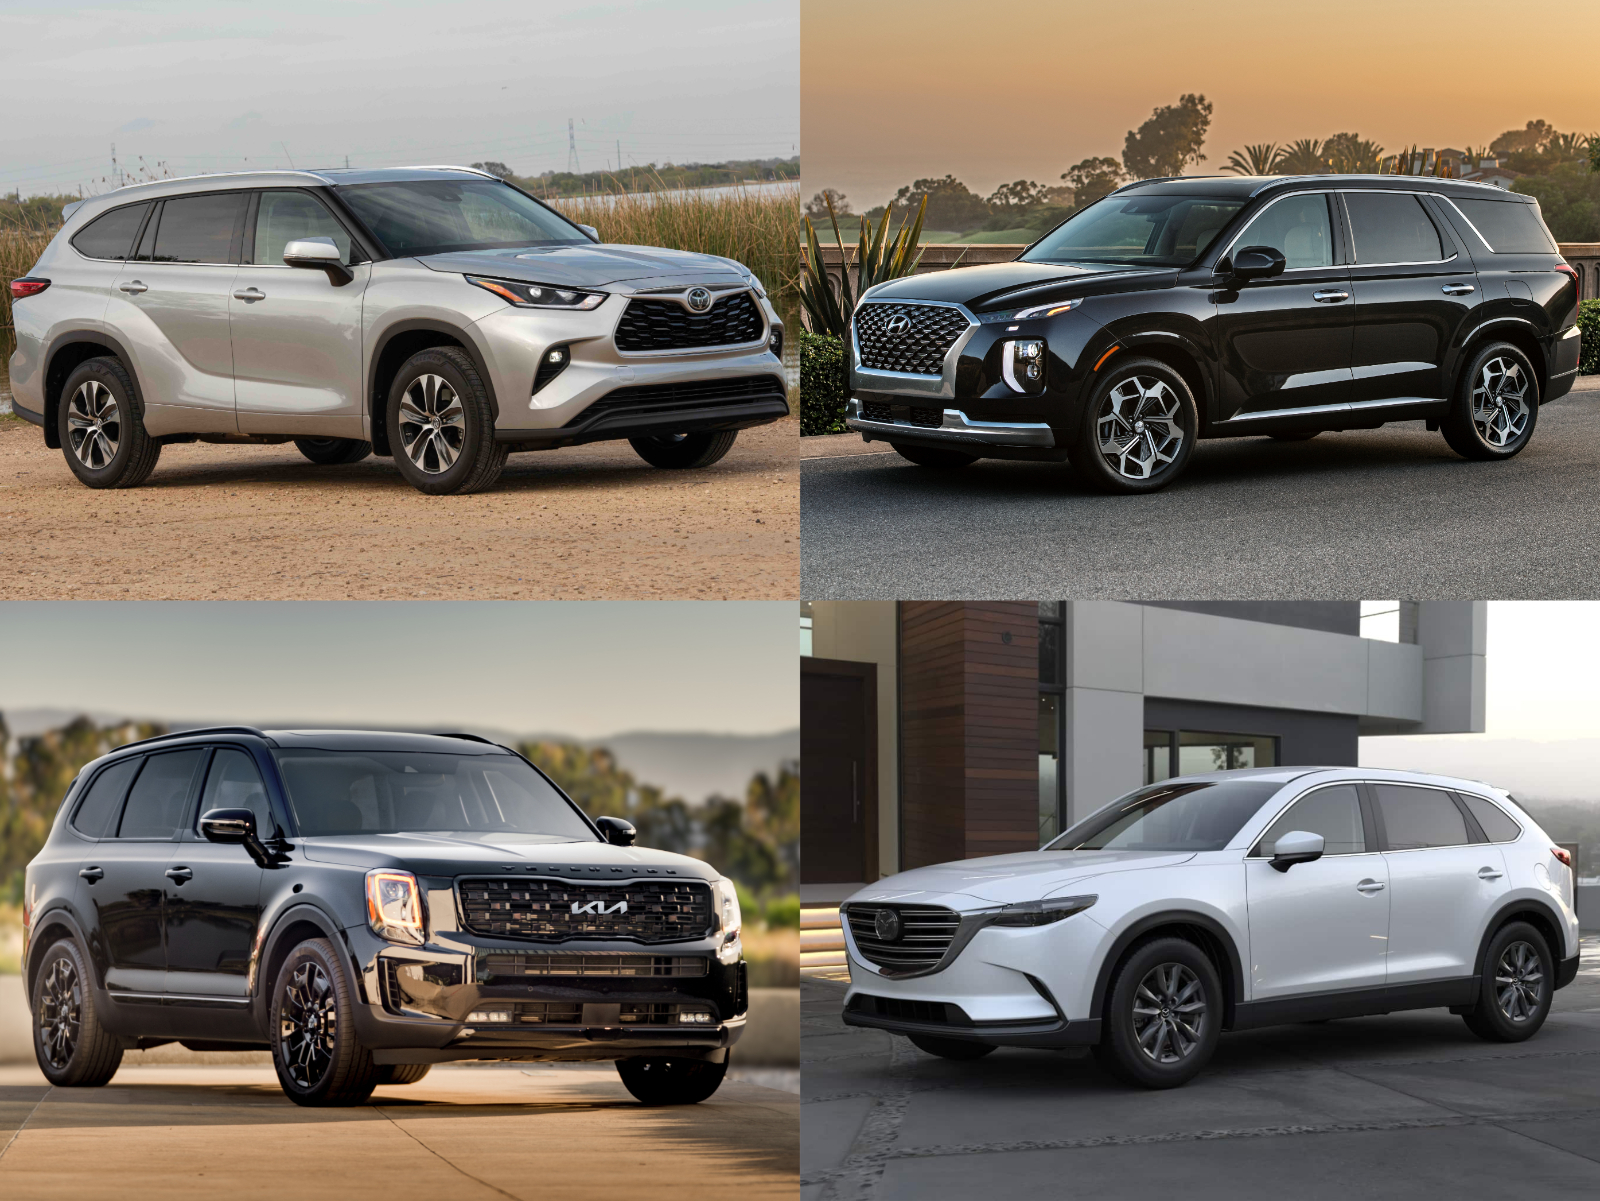 Safe new SUV alternatives to the 2022 Toyota Highlander are pictured here from Hyundai, Kia, and Mazda